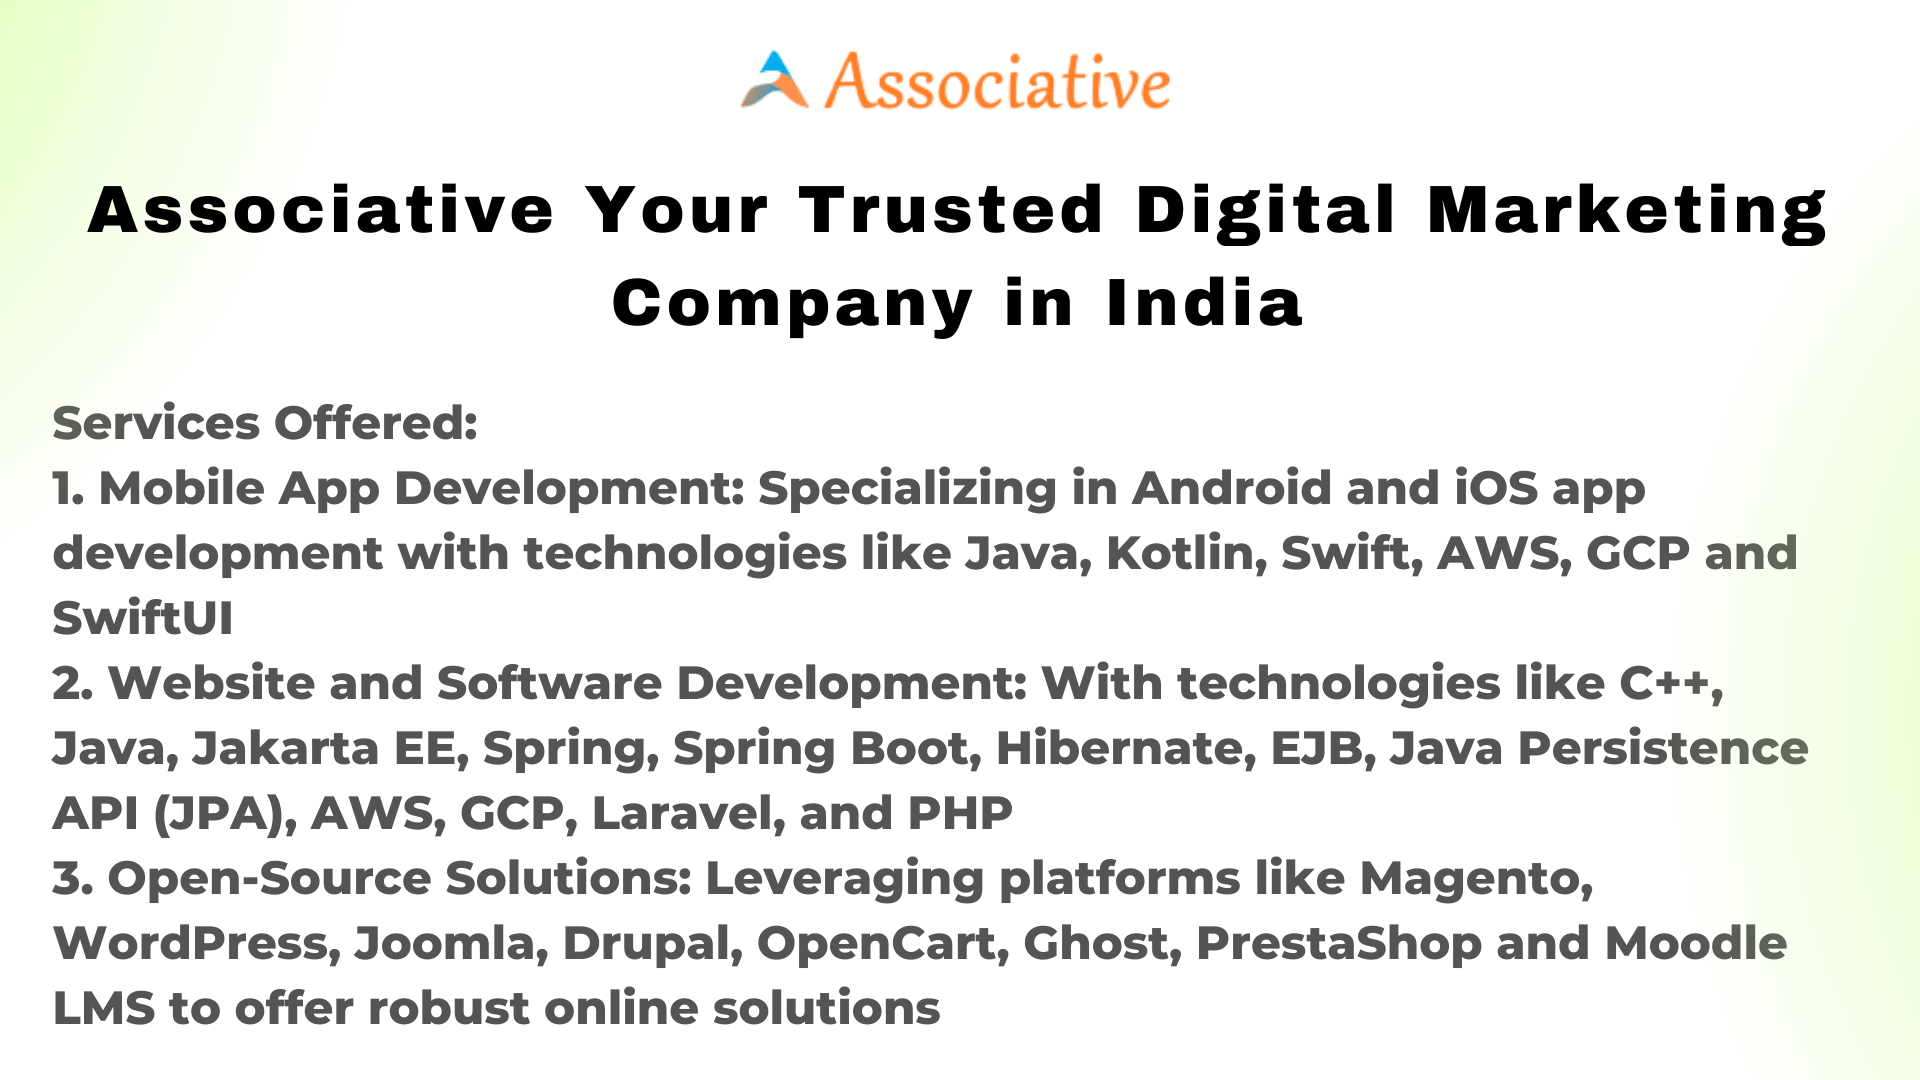 Associative Your Trusted Digital Marketing Company in India